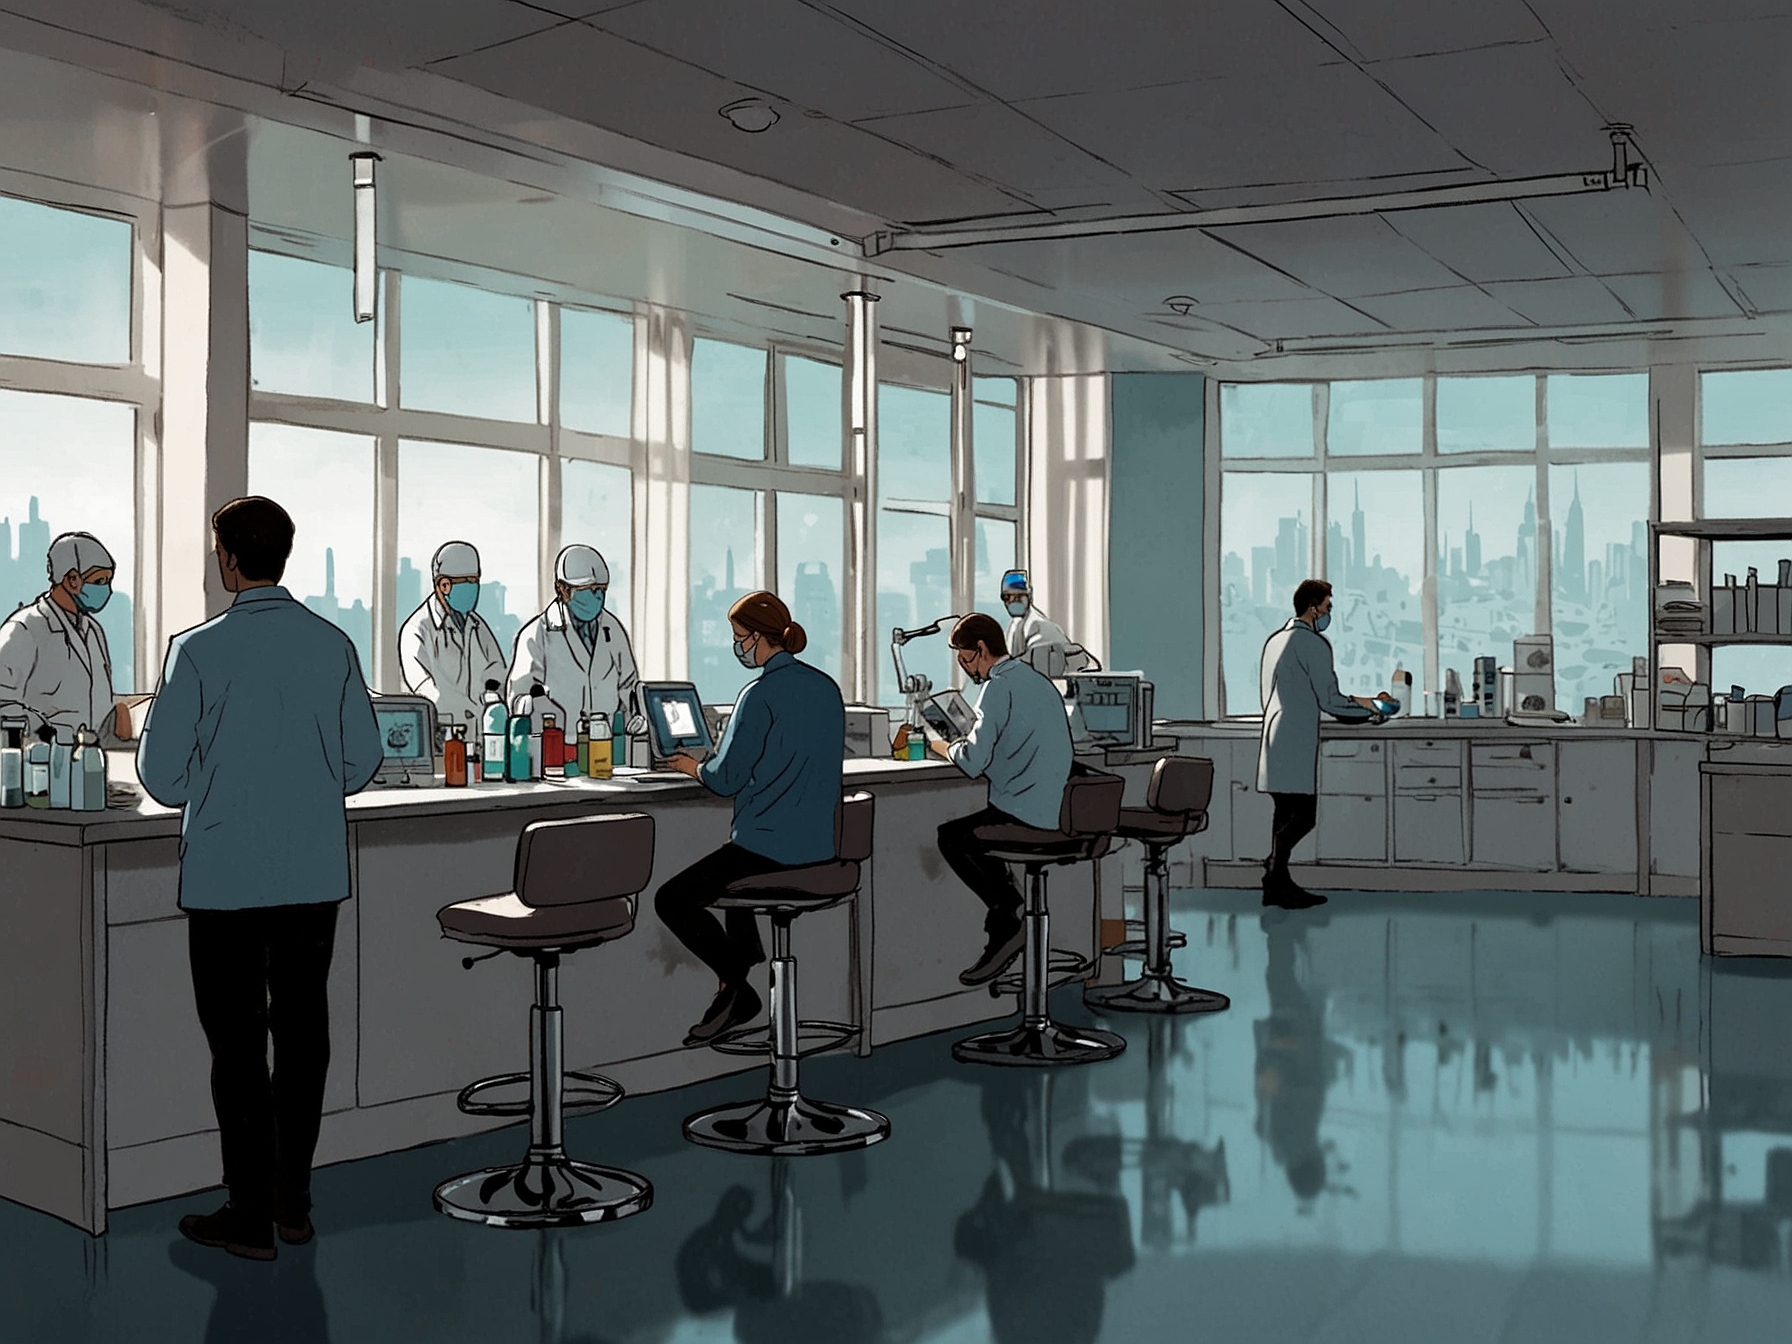 Illustration of Astria Therapeutics' innovative drug development process showing researchers in a lab setting, highlighting the company's commitment to unmet medical needs and patient-centric approaches.